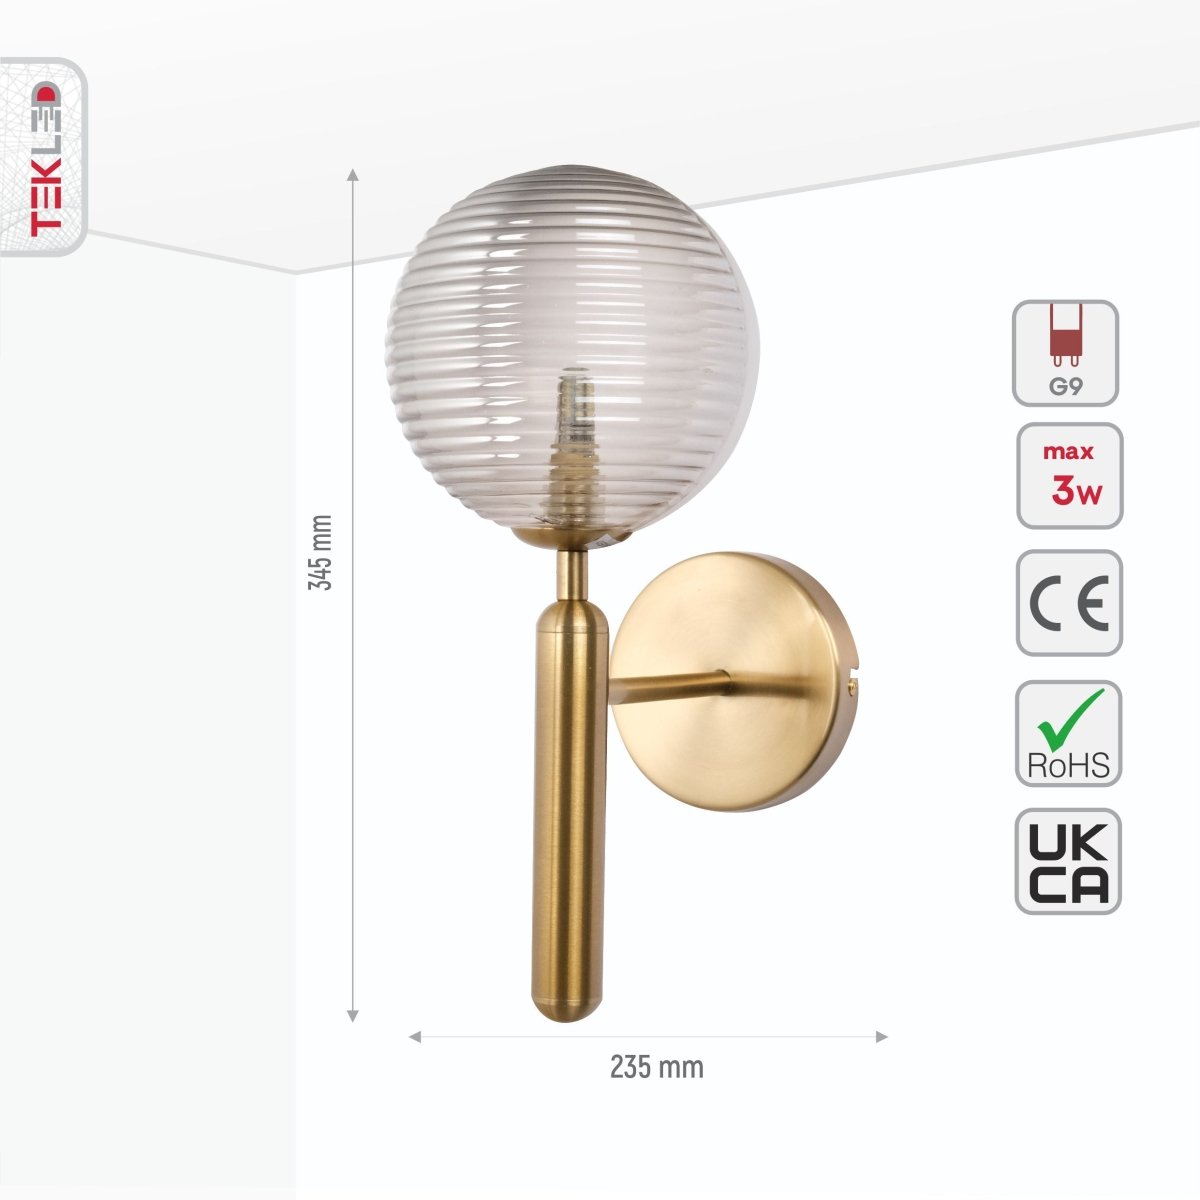 Size and specs of Striped Glass Gold Metal Wall Light with G9 Fitting | TEKLED 151-19722